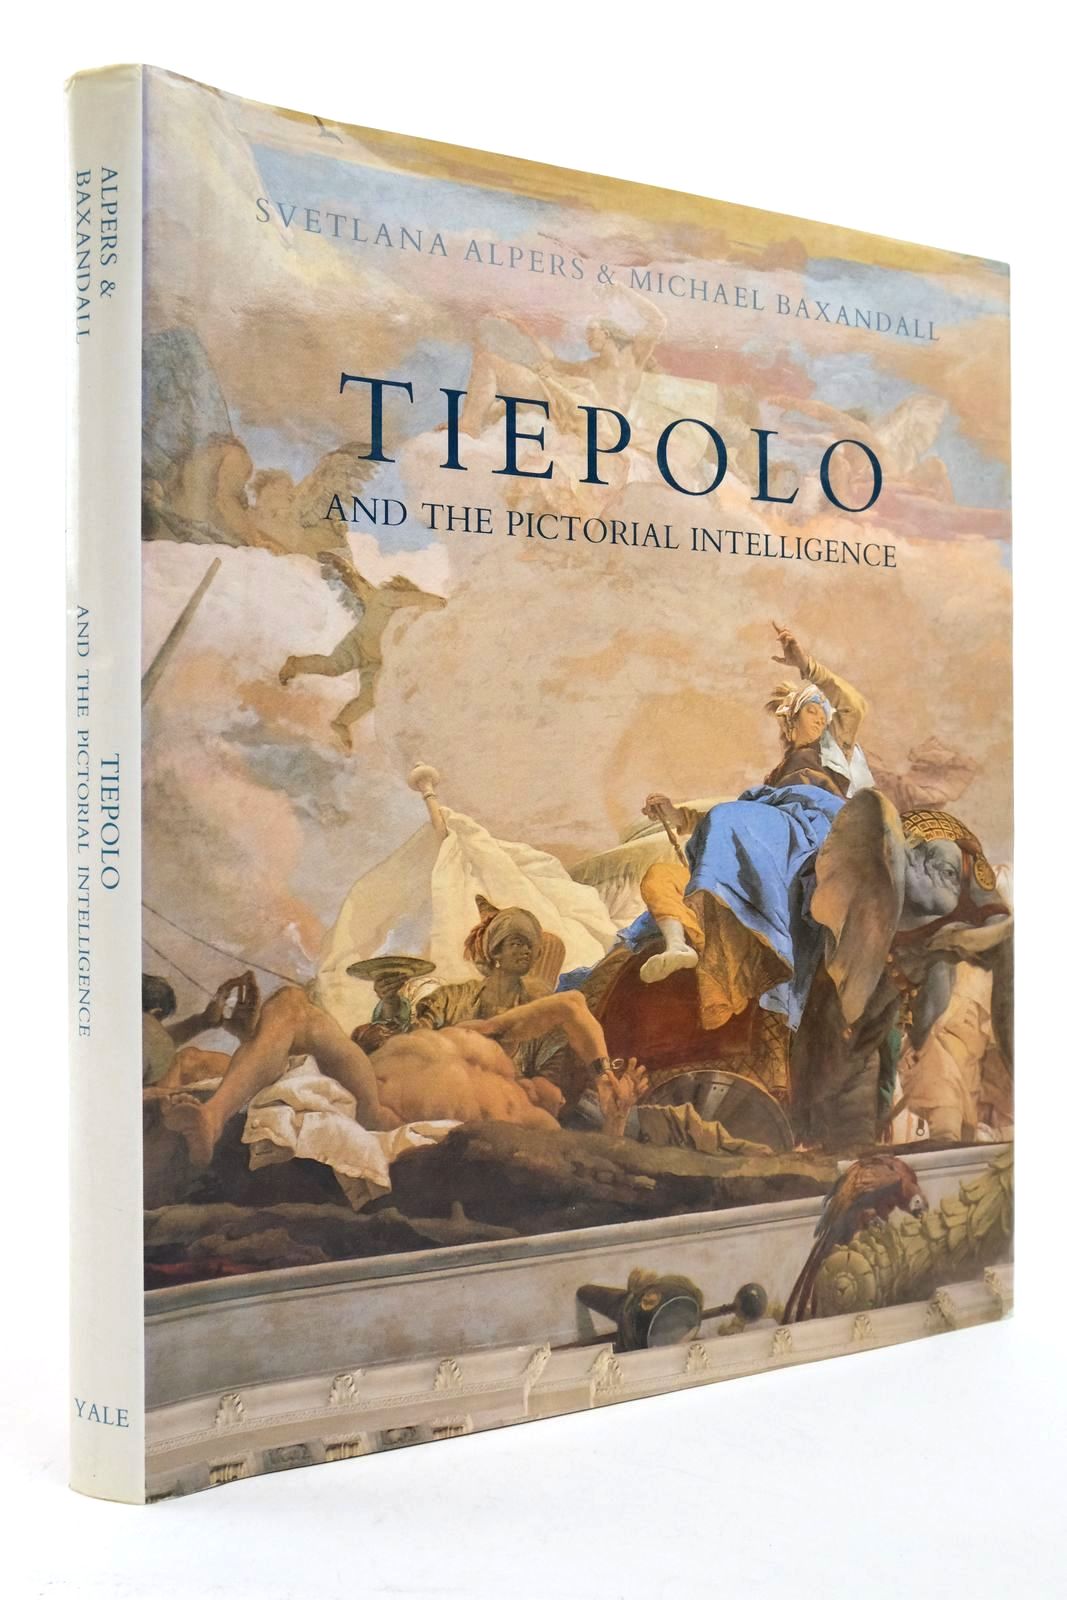 Photo of TIEPOLO AND THE PICTORIAL INTELLIGENCE written by Alpers, Svetlana Baxandall, Michael illustrated by Tiepolo, Giambattista published by Yale University Press (STOCK CODE: 2138858)  for sale by Stella & Rose's Books